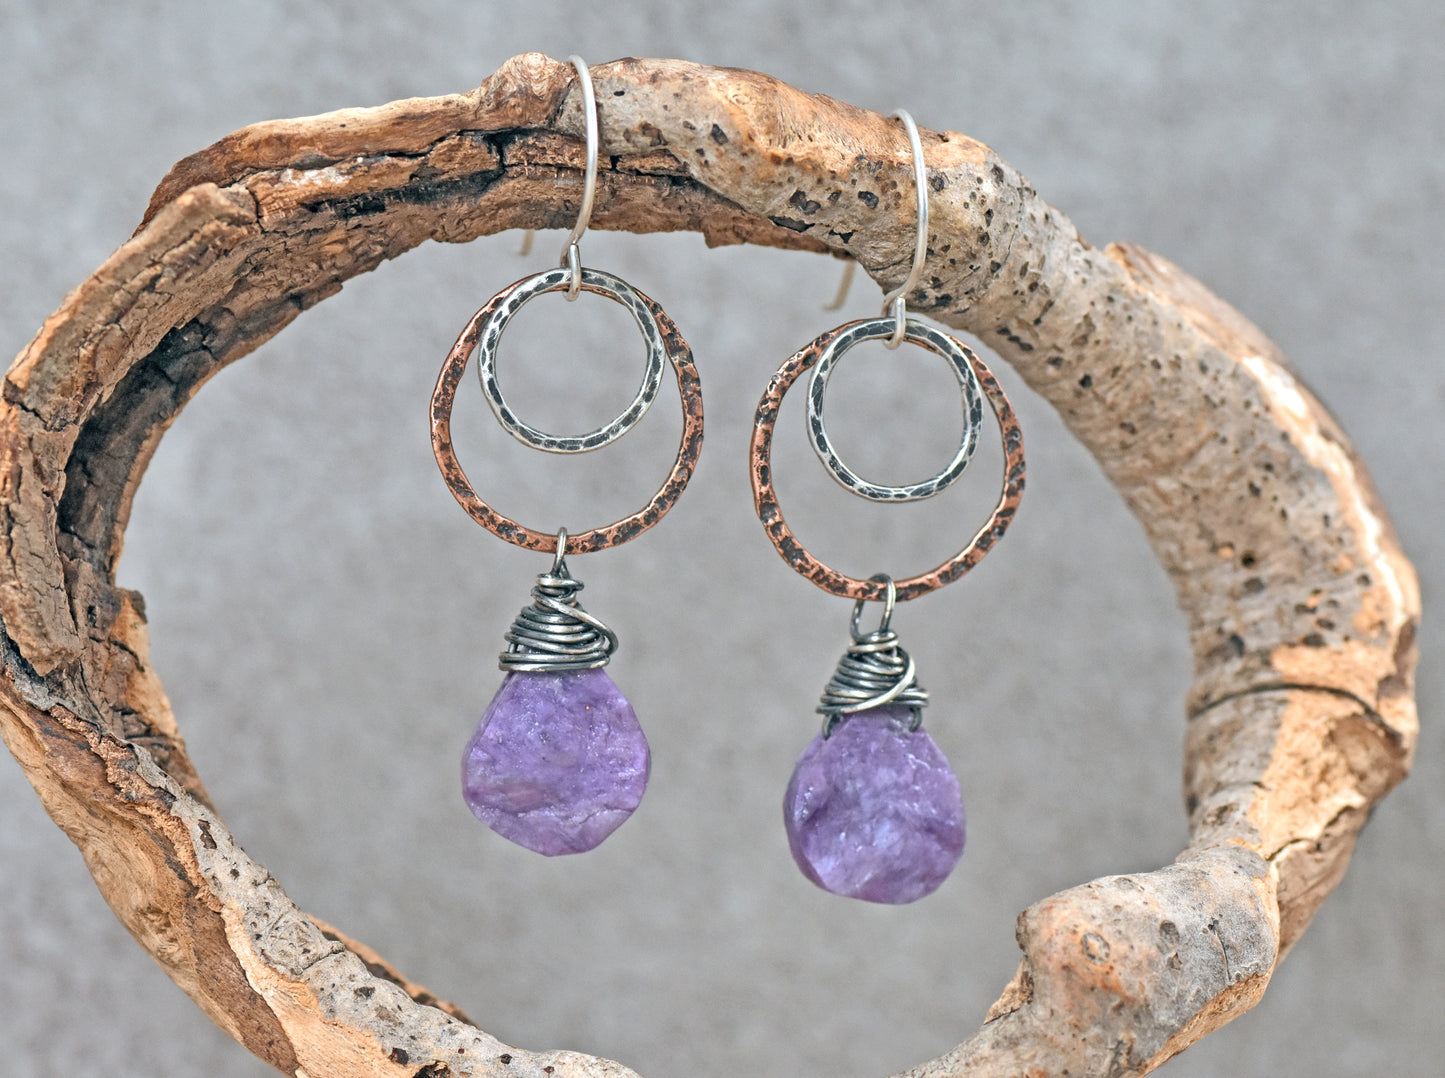 Charoite Mixed Metal Earrings, Natural Purple Gemstone Dangles, Rustic Sterling Silver Jewelry, Copper Statement Circle Earrings